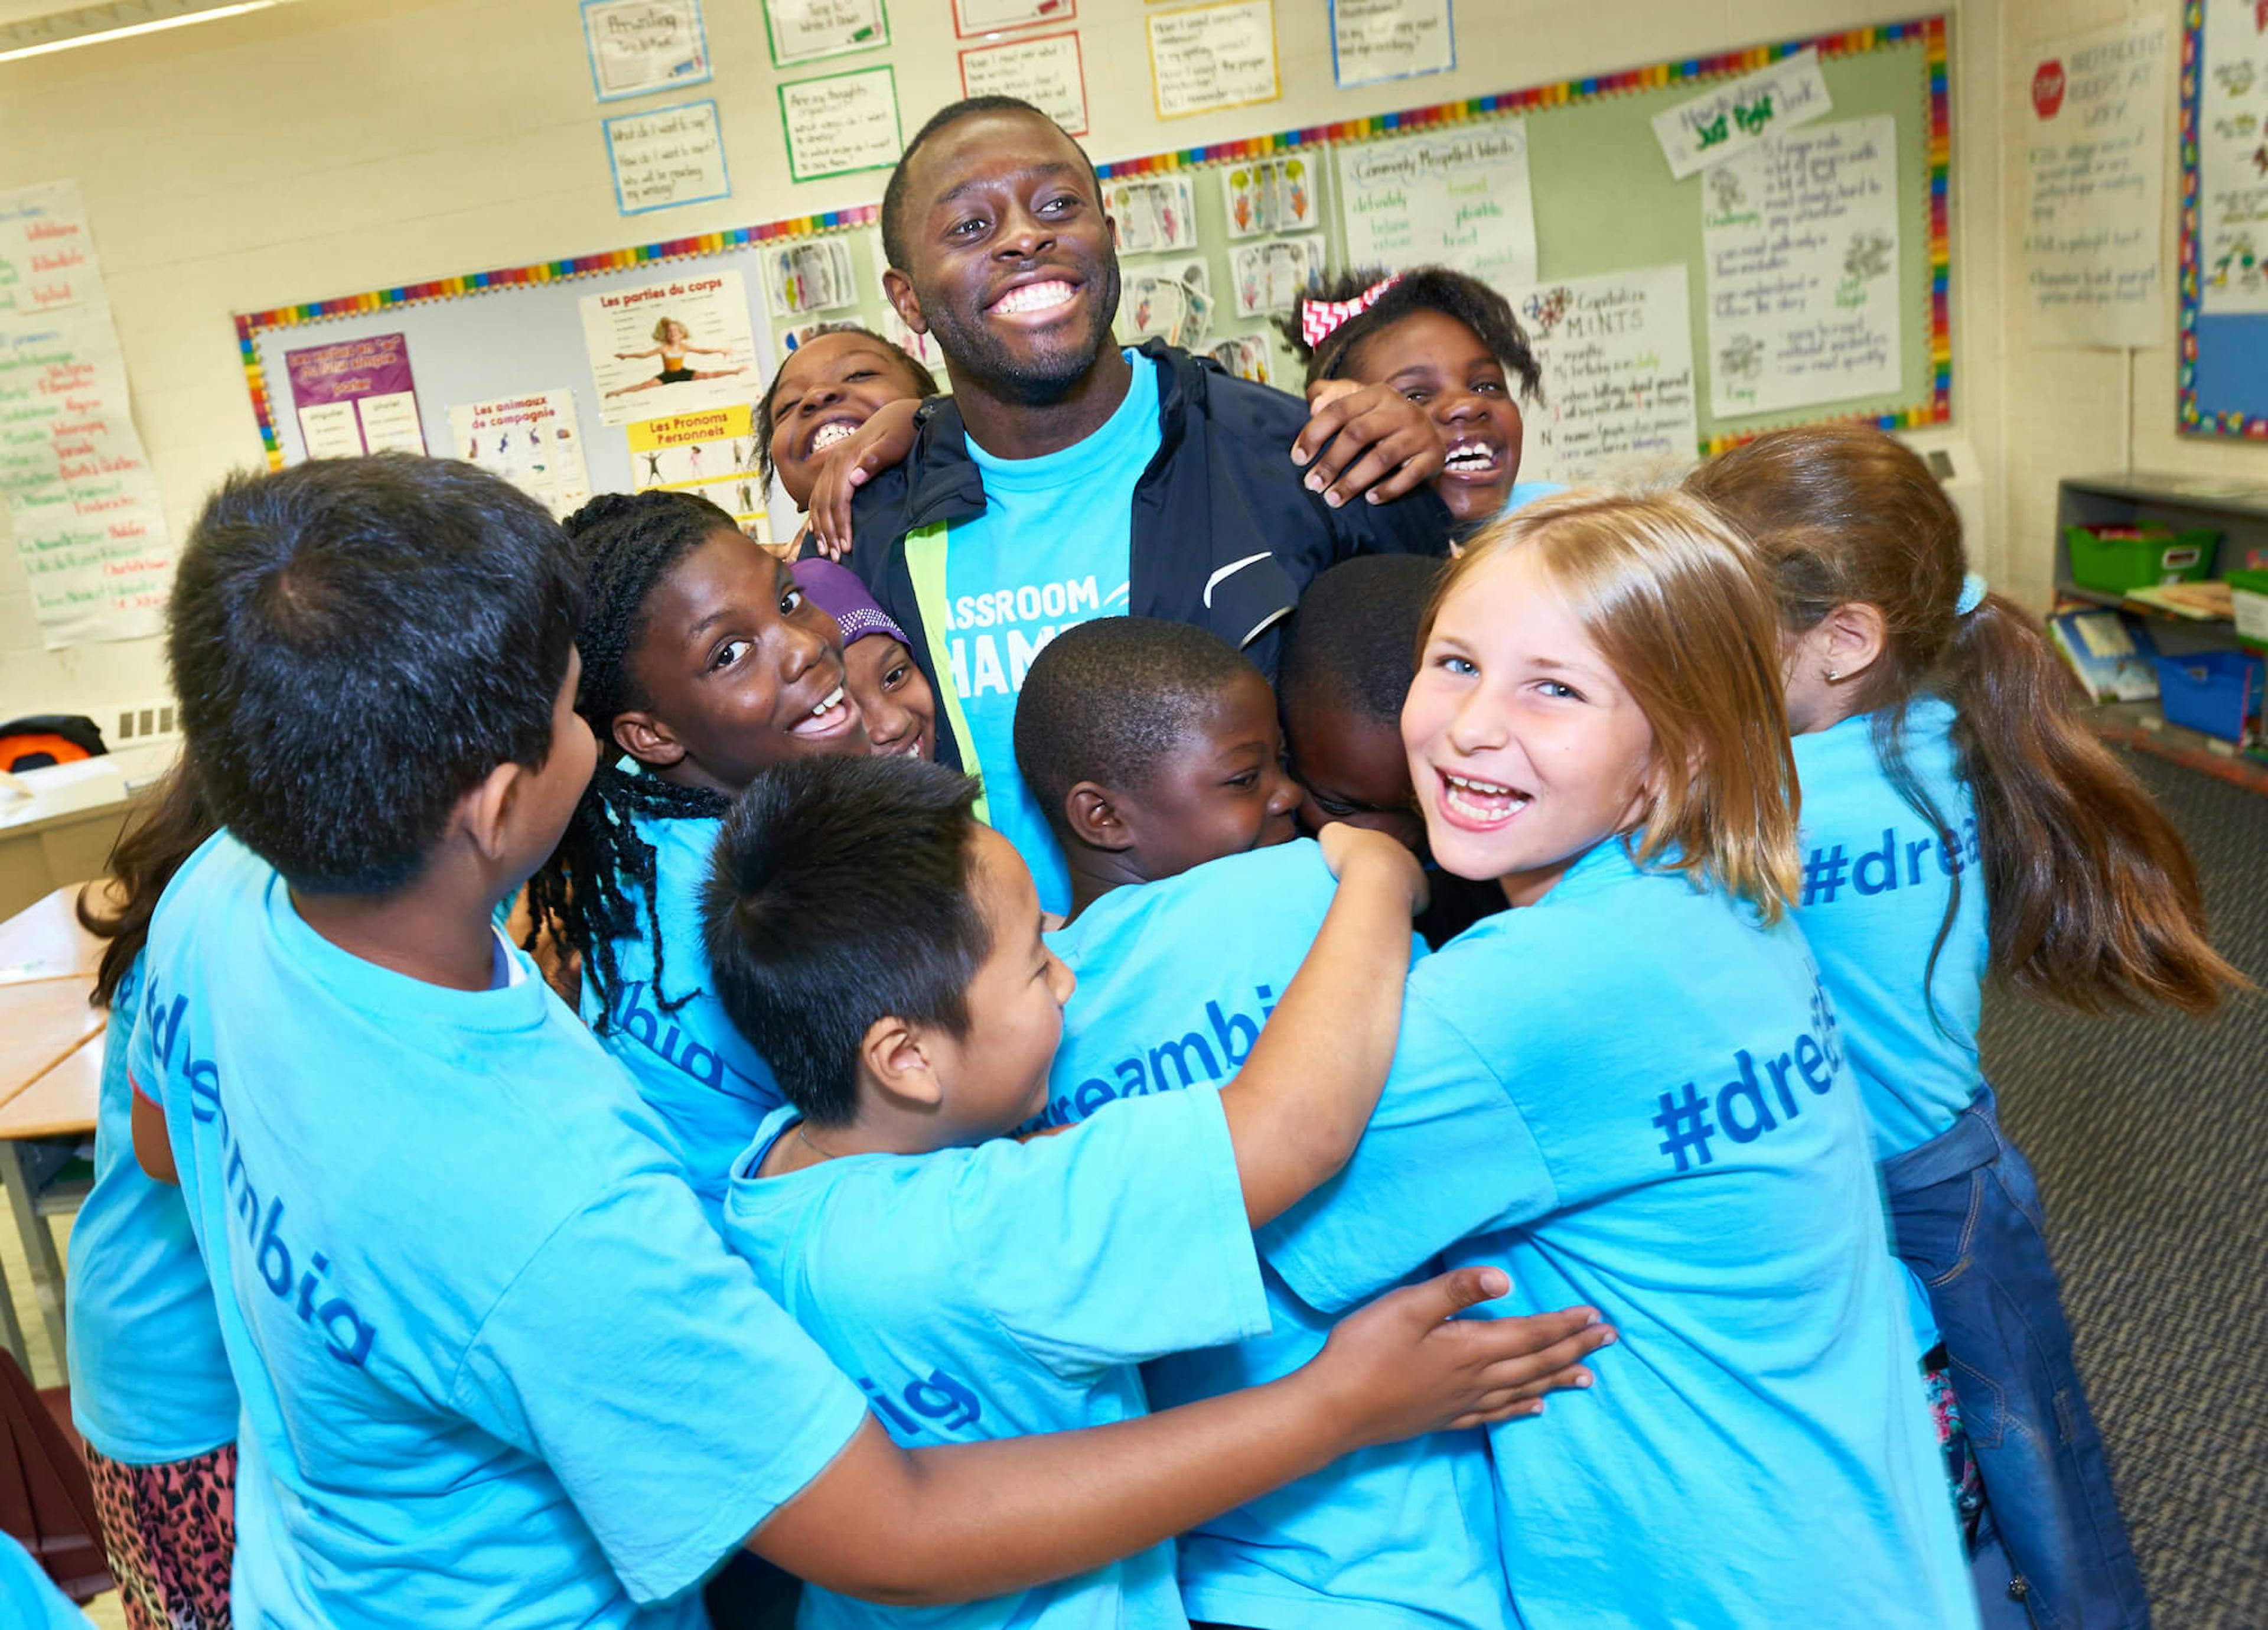 A group of children in Classroom Champions shirts hug an athlete